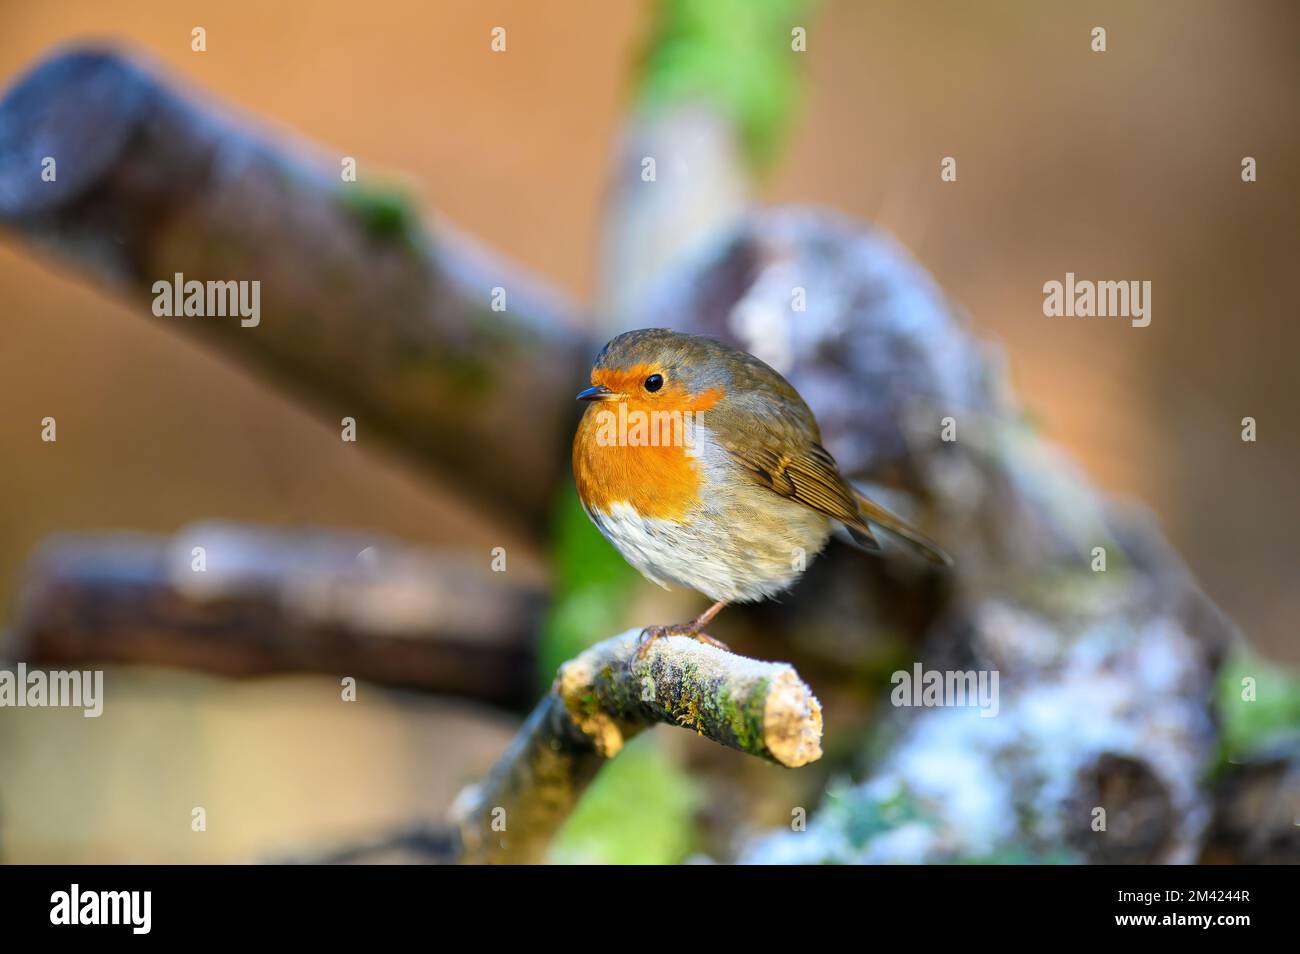 Robin, Erithacus rubecula, perched on a frosty branch, looking left Stock Photo